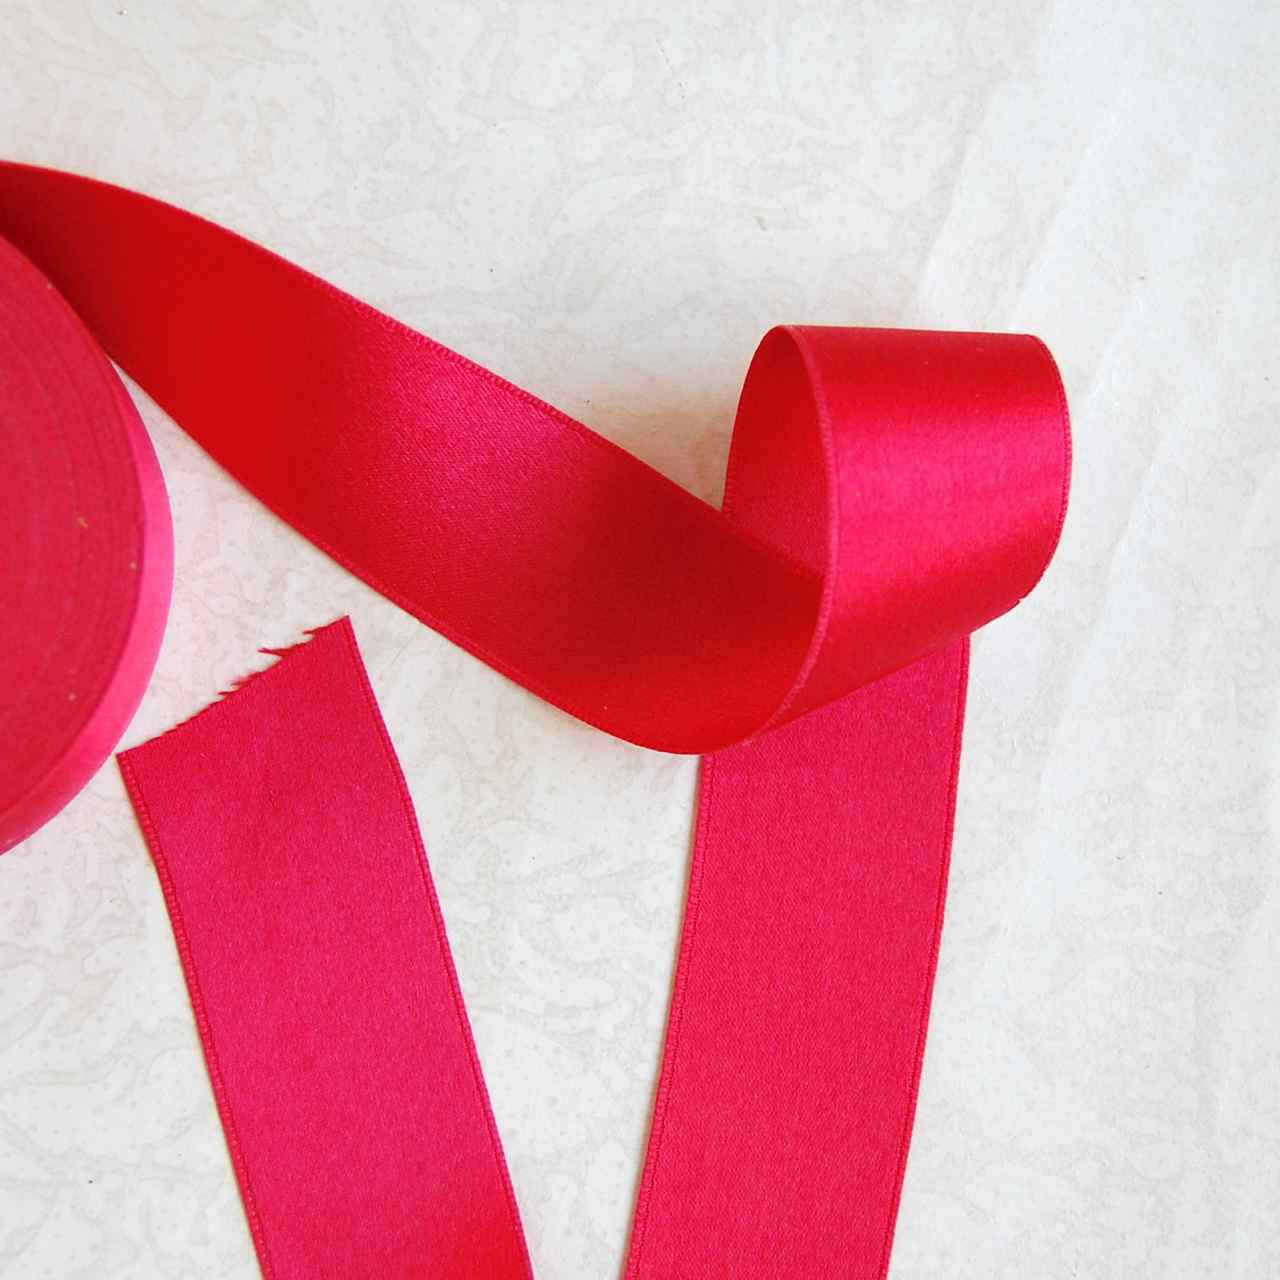 5/8 WIDE DOUBLE FACE SILK SATIN RIBBON - ROUGE RED # 119